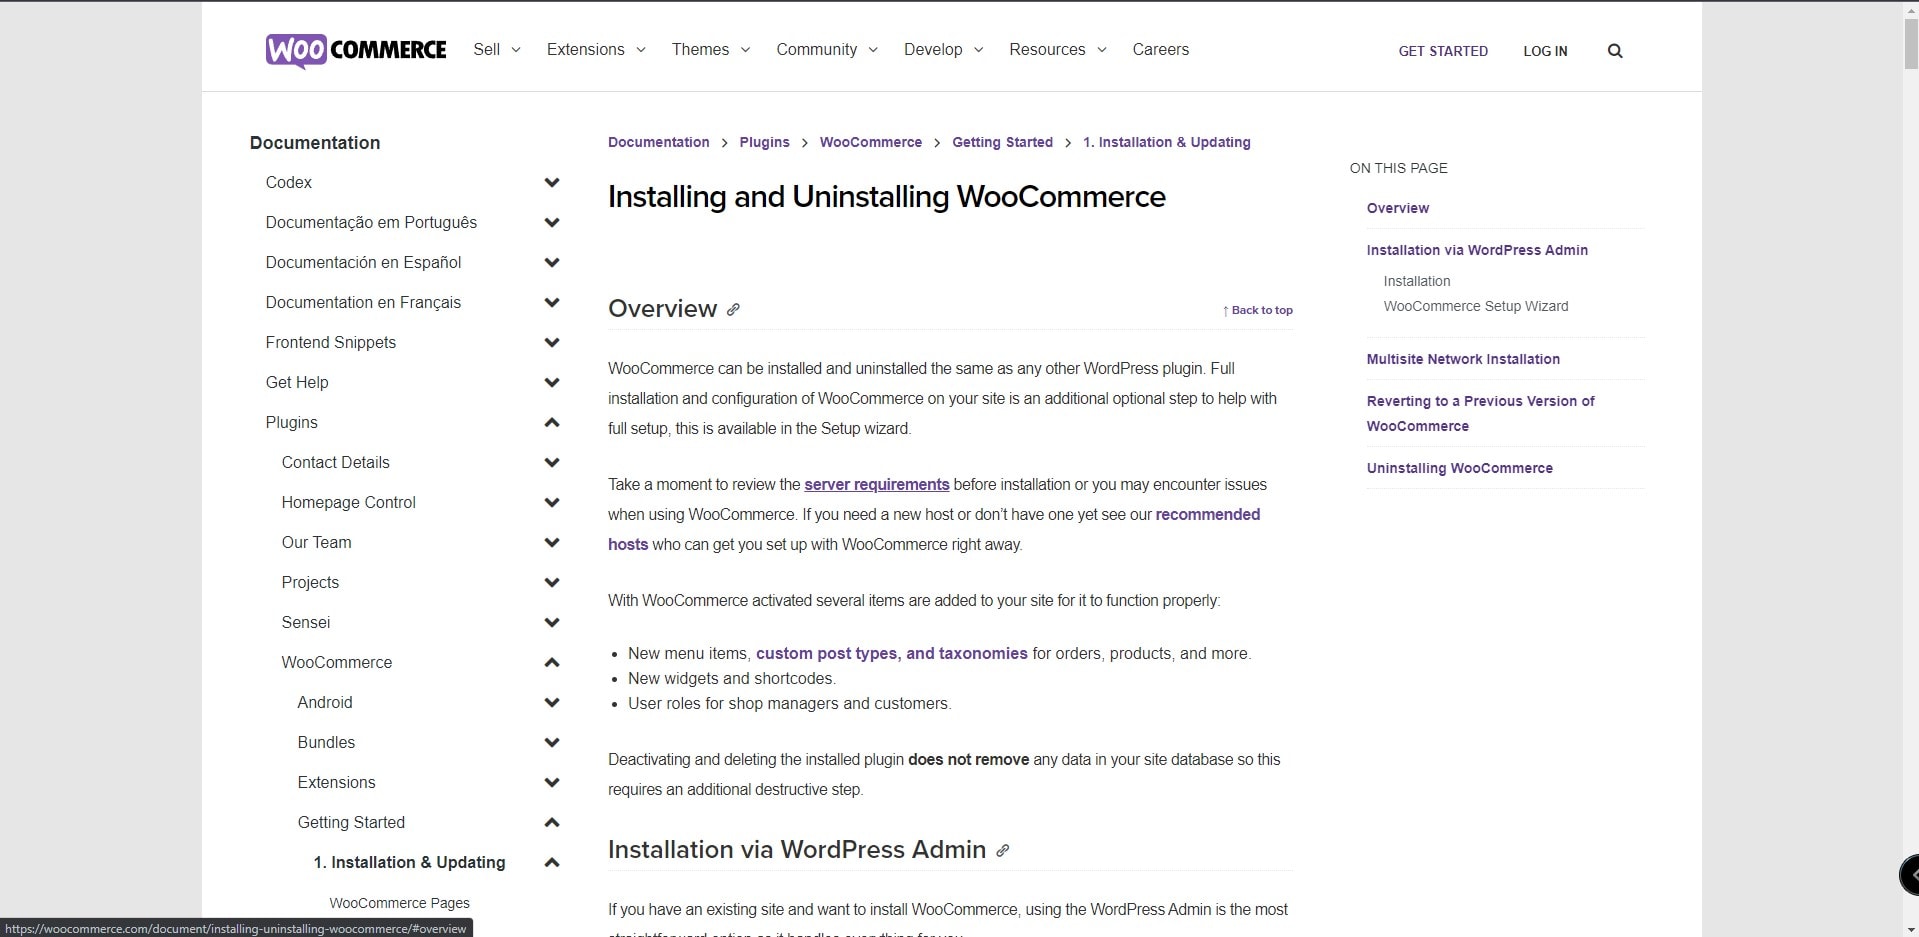 WooCommerce installation and uninstallation instructions subsite